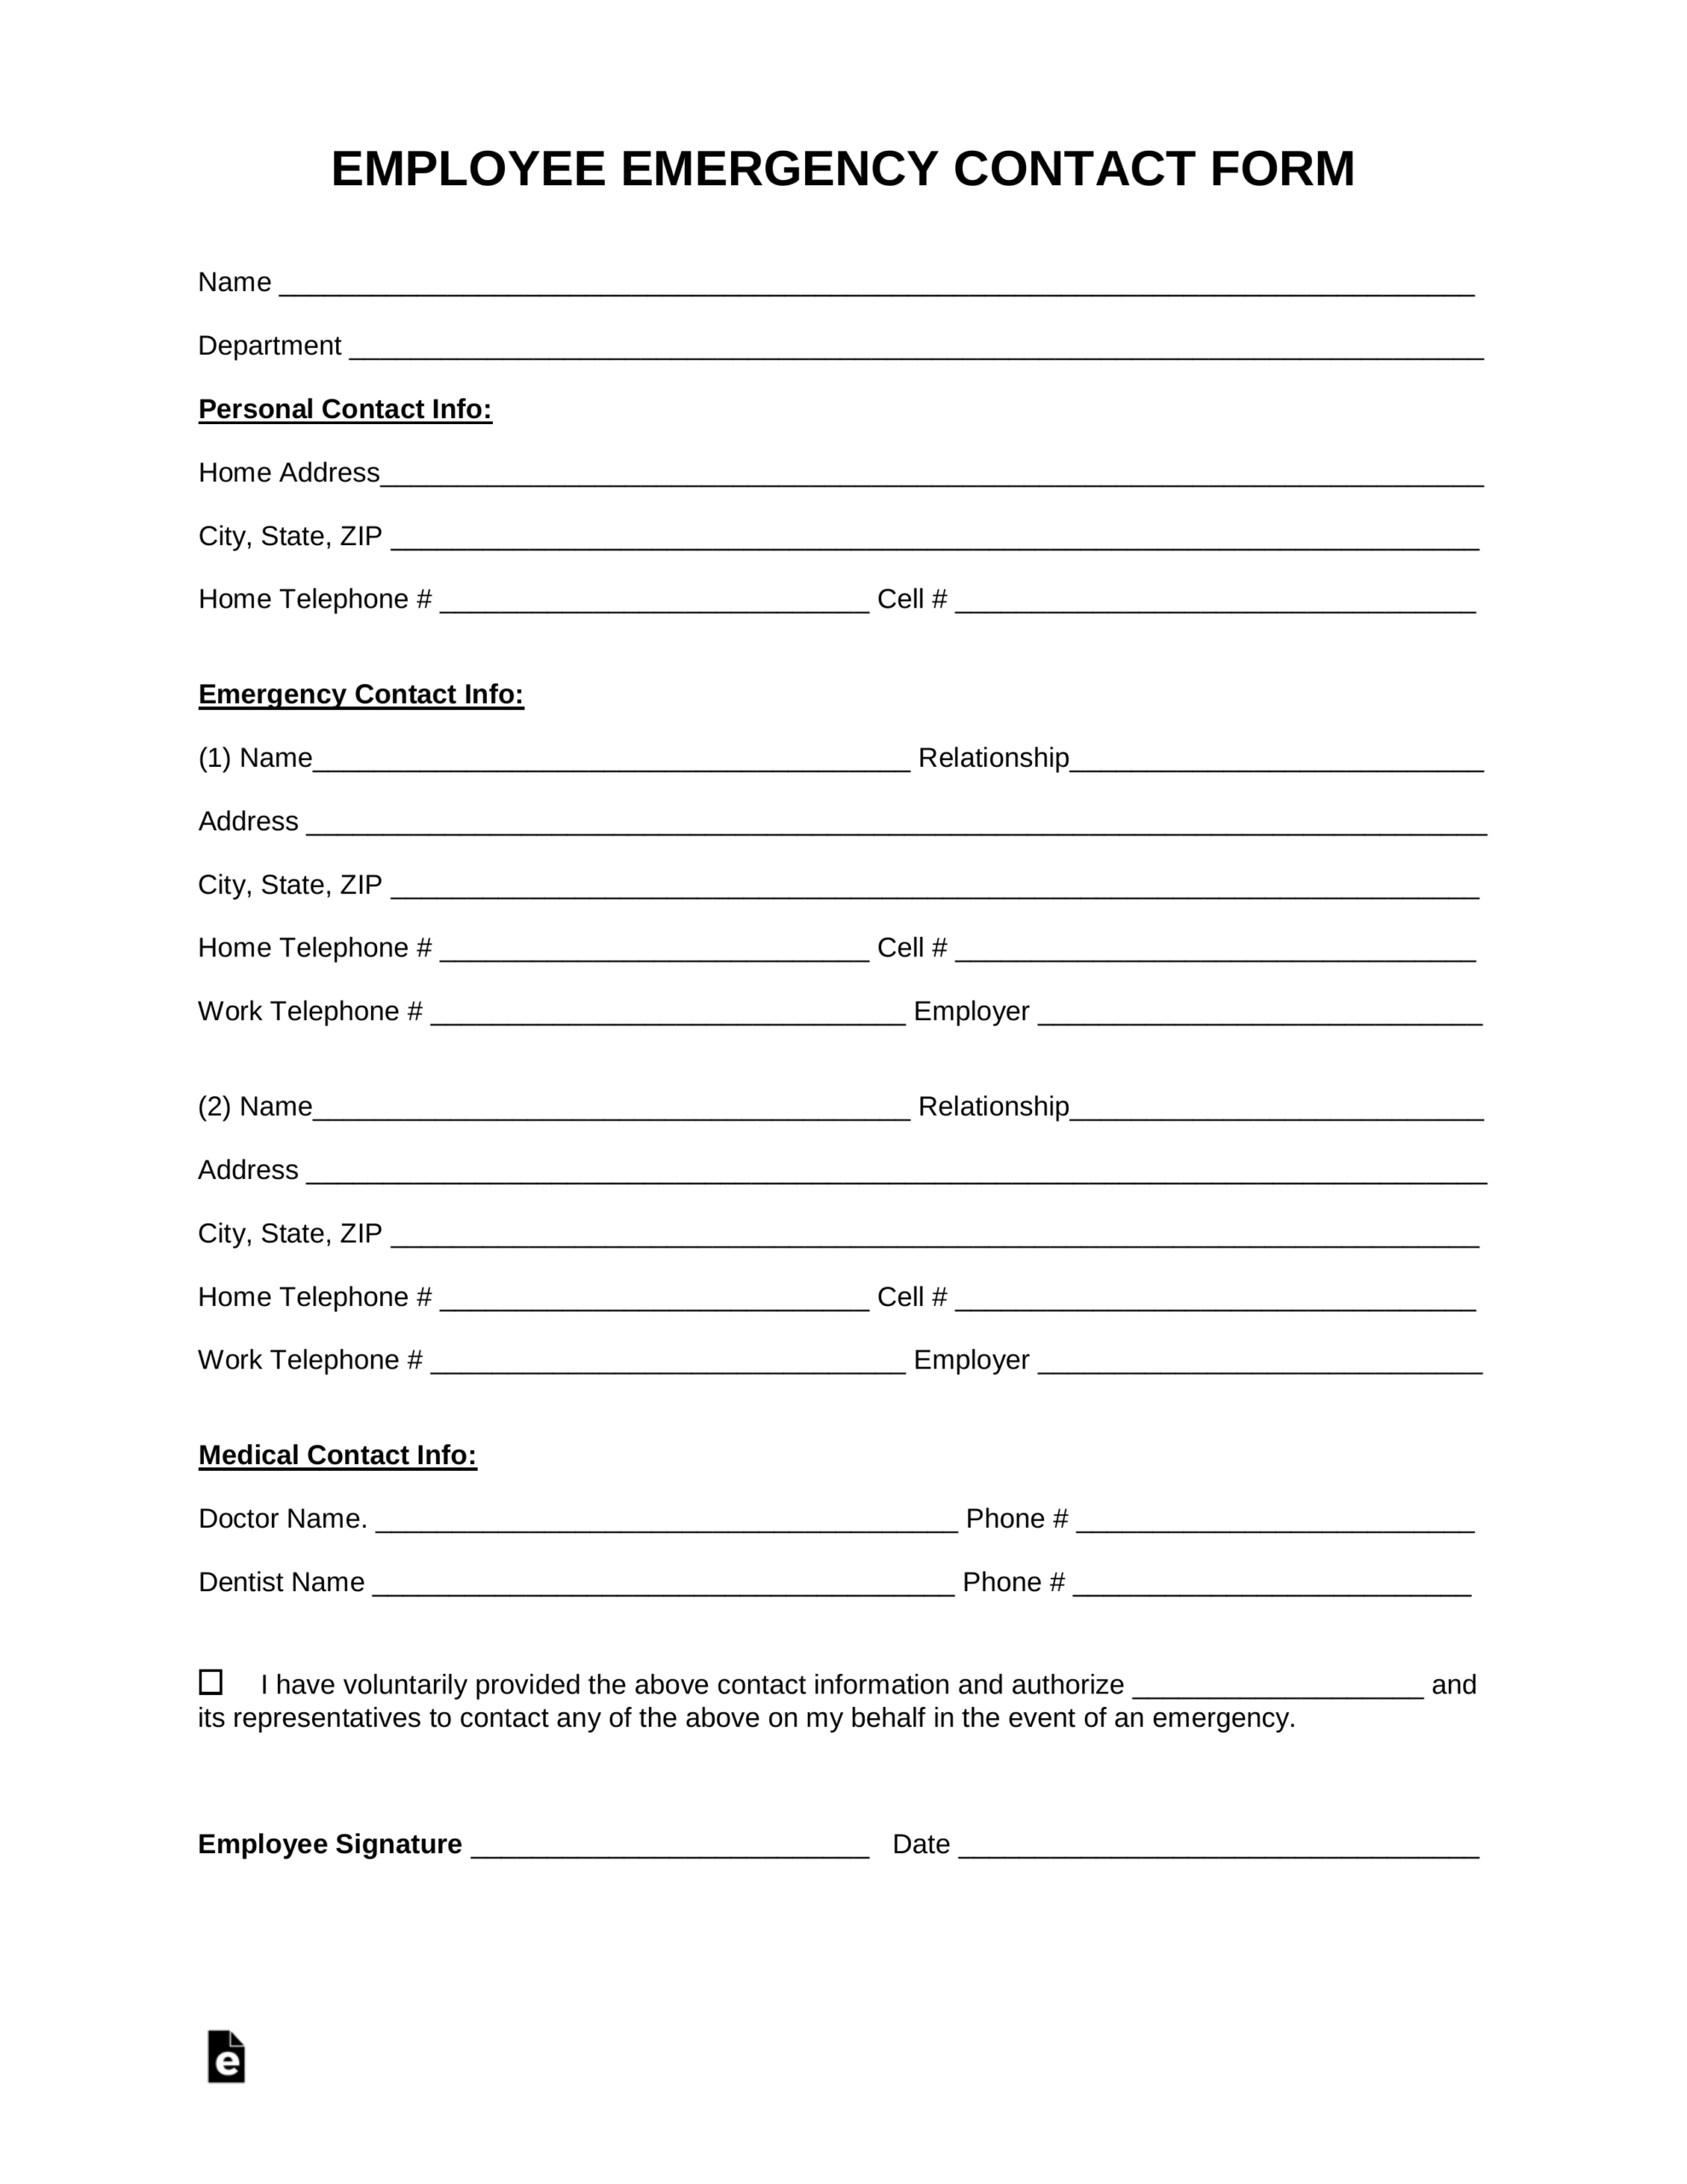 Free Employee Emergency Contact Form – Pdf | Word | Eforms Throughout Emergency Contact Card Template